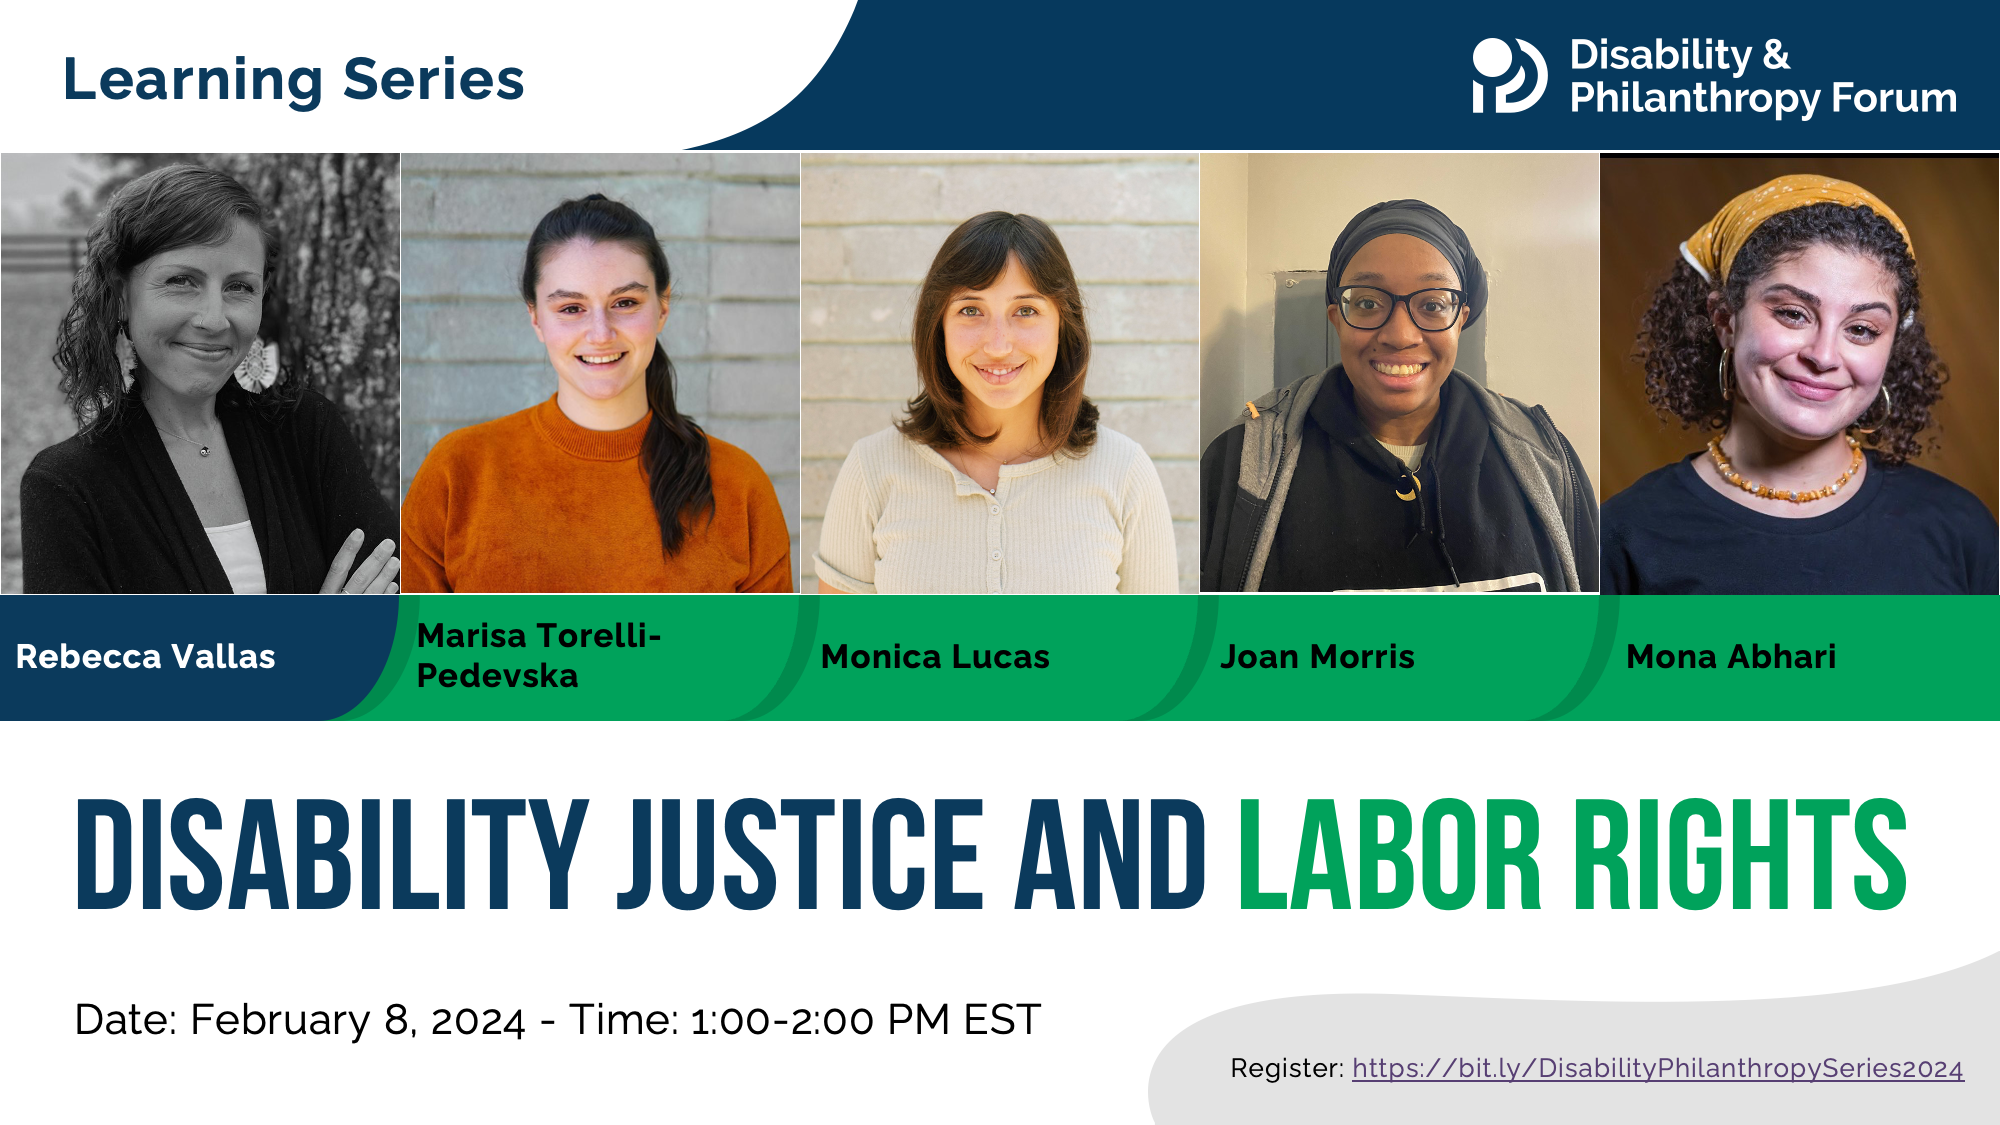 Photos of Disability Justice and Labor Rights moderator Rebecca Vallas and panelists Marisa Torelli-Pedevska, Monica Lucas, Joan Morris, and Mona Abhari. The date of the event is February 8, 2024 at 1:00pm ET.